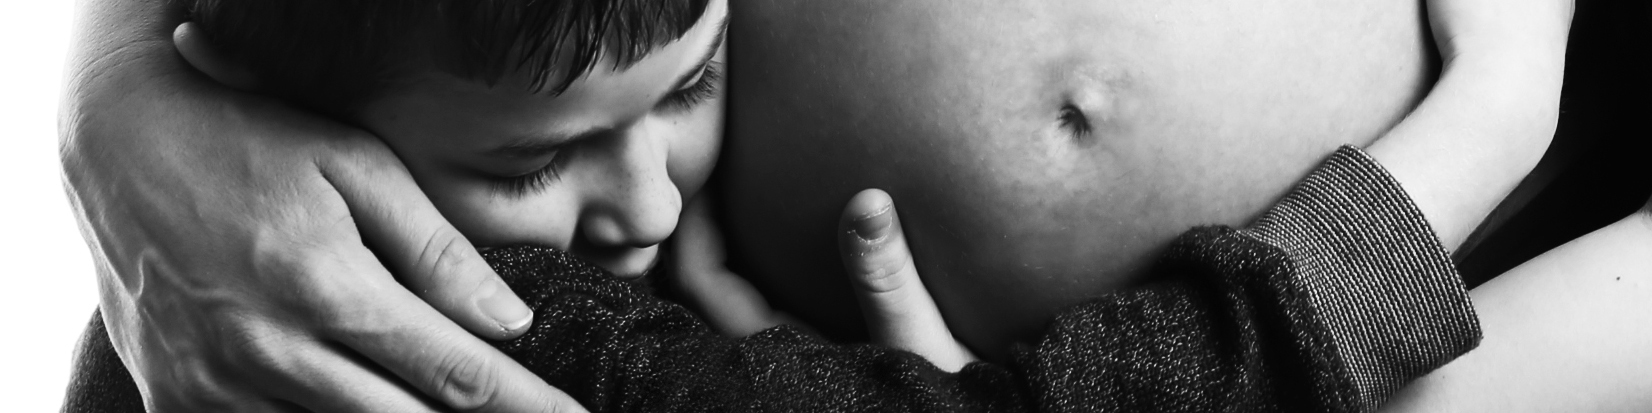 Maternity photograph of a toddler hugging mothers belly